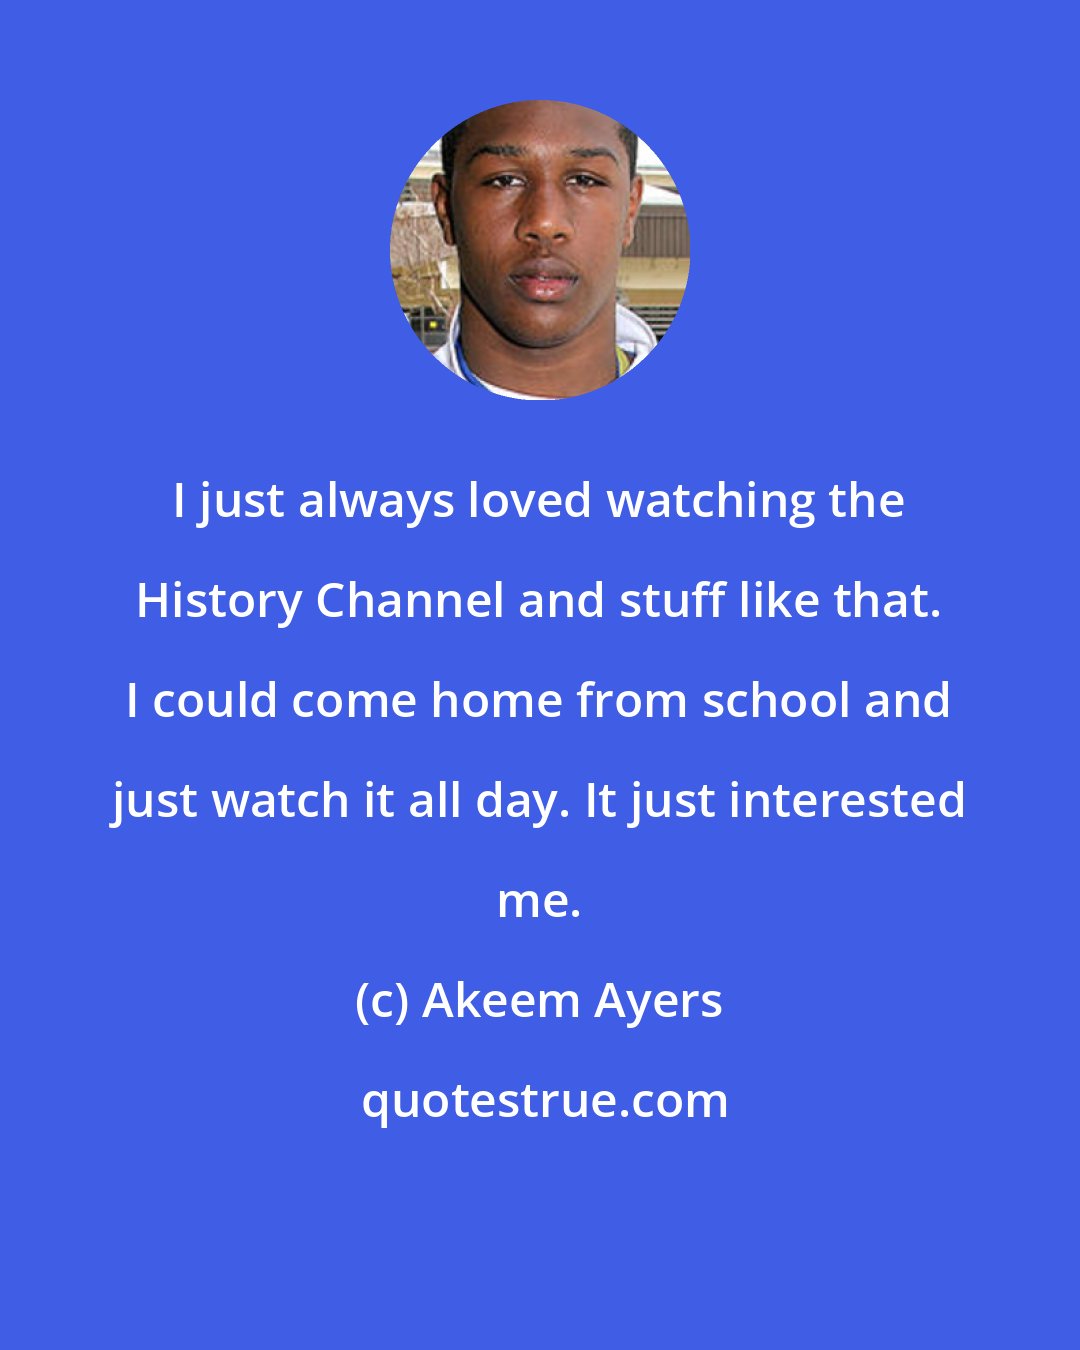 Akeem Ayers: I just always loved watching the History Channel and stuff like that. I could come home from school and just watch it all day. It just interested me.